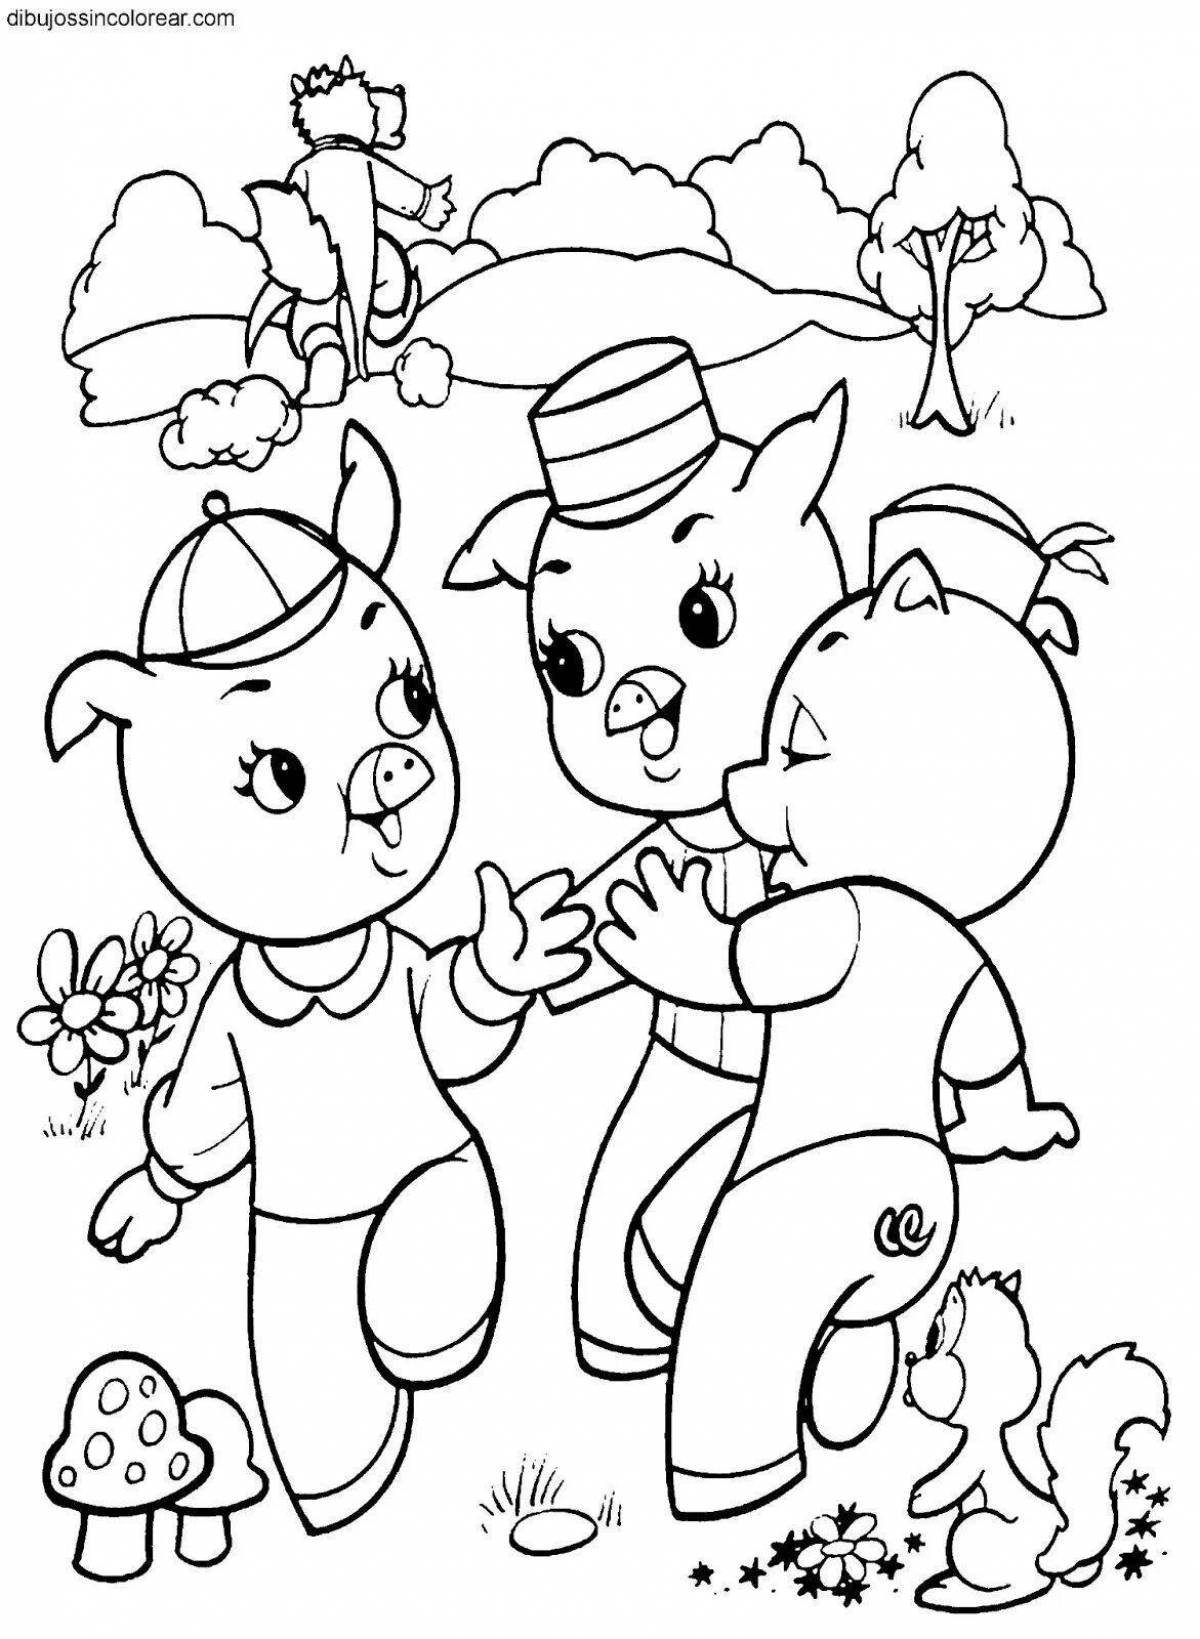 3 little pigs fun coloring book for kids